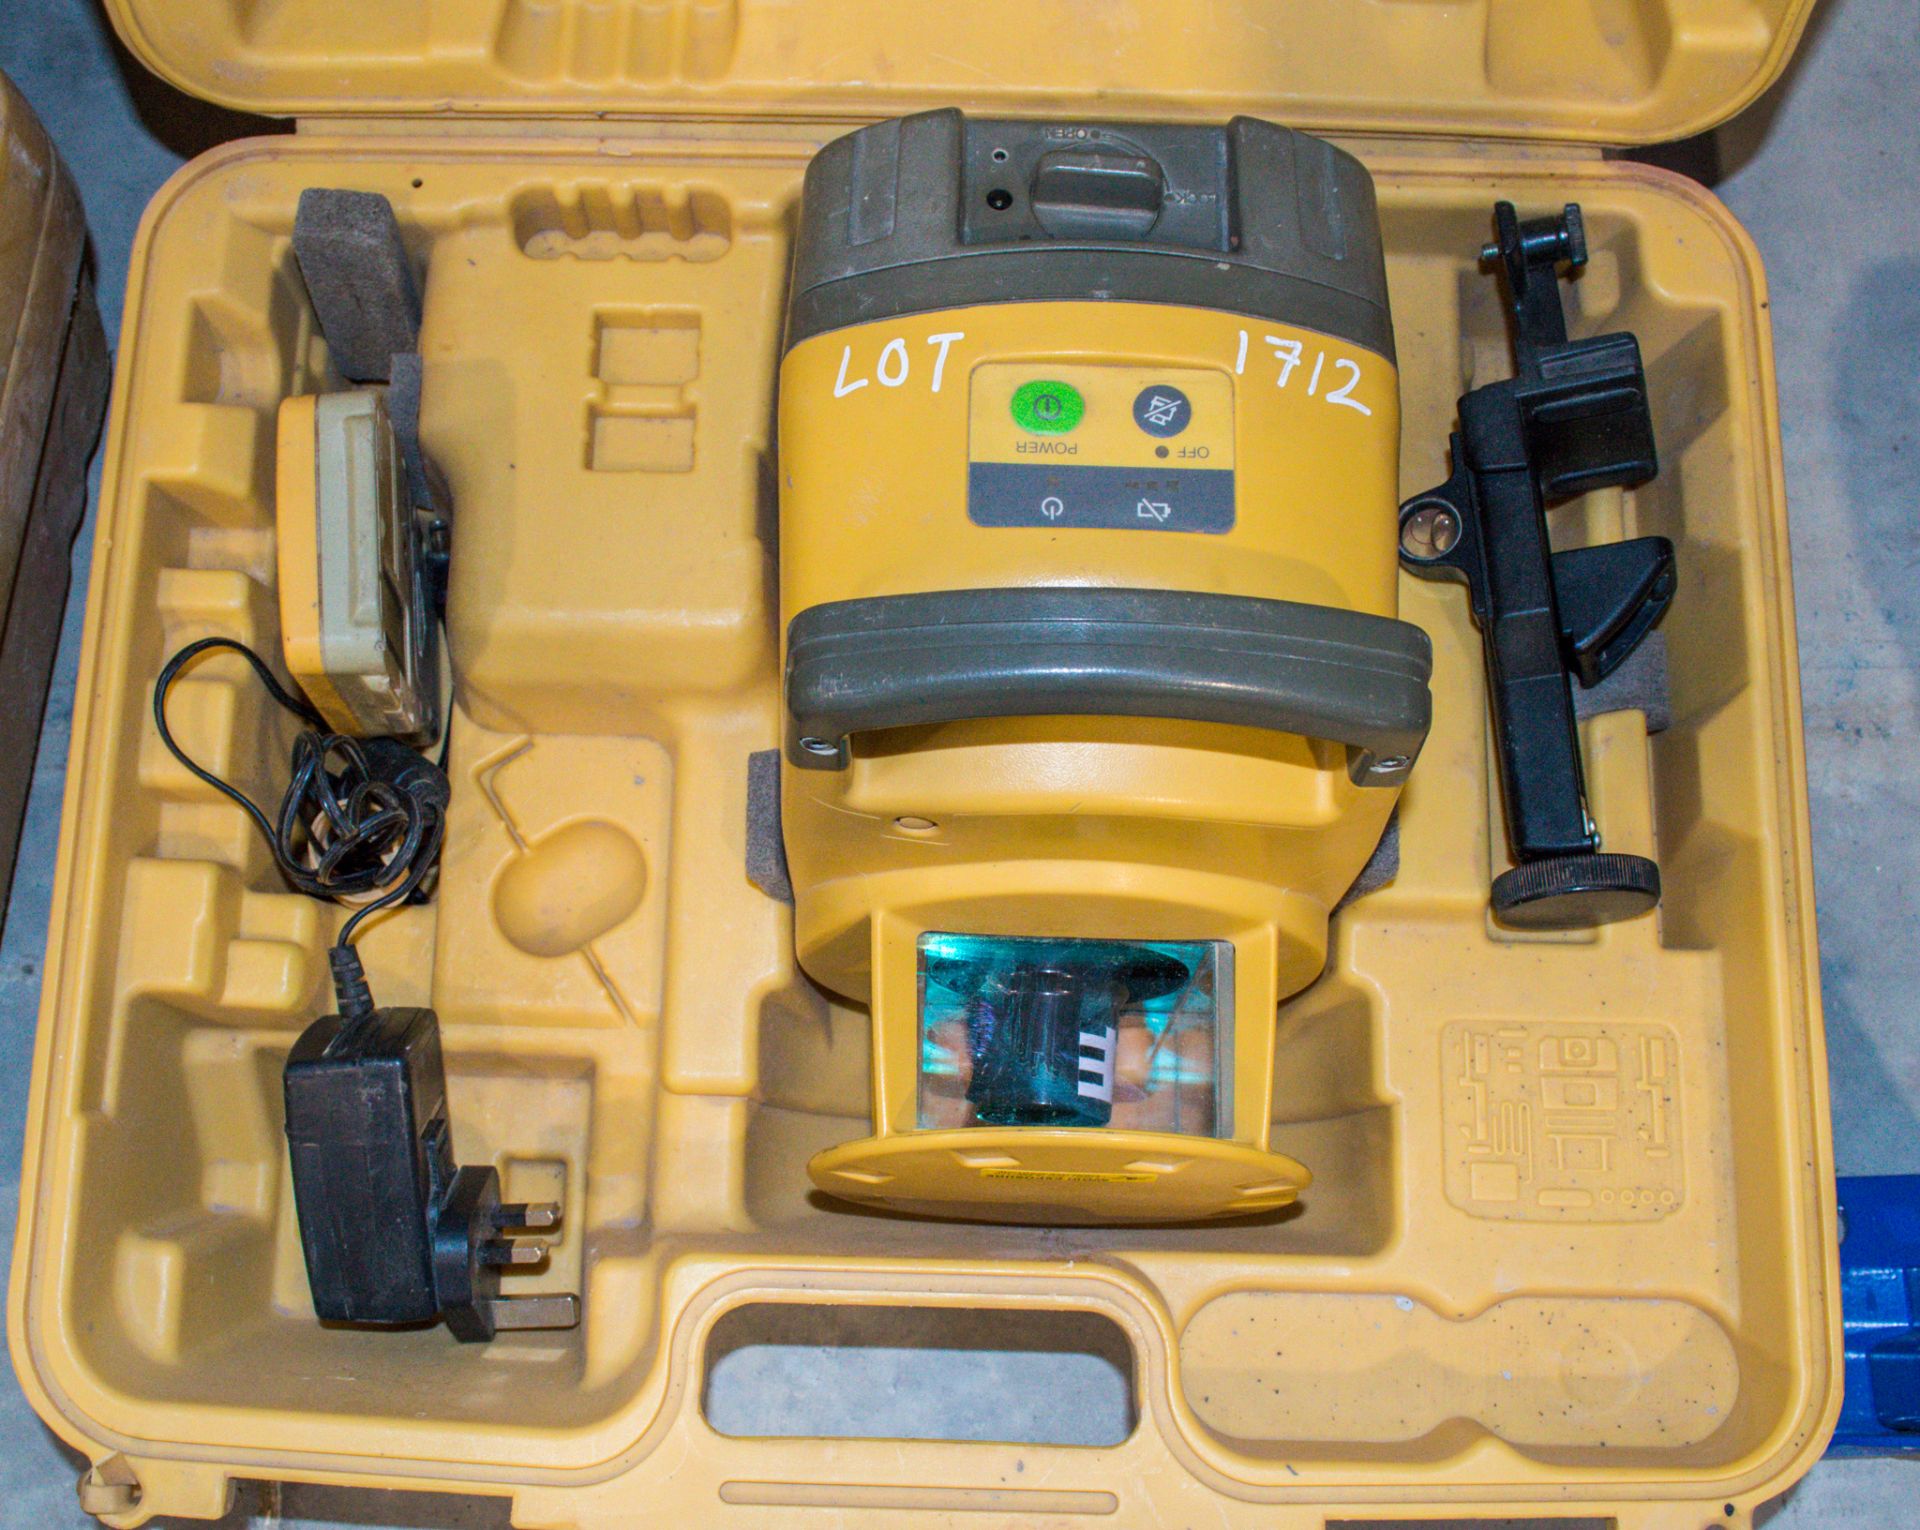 Topcon RL-H3A rotating laser level c/w LS-80L long range receiver, charger and carry case B0217215